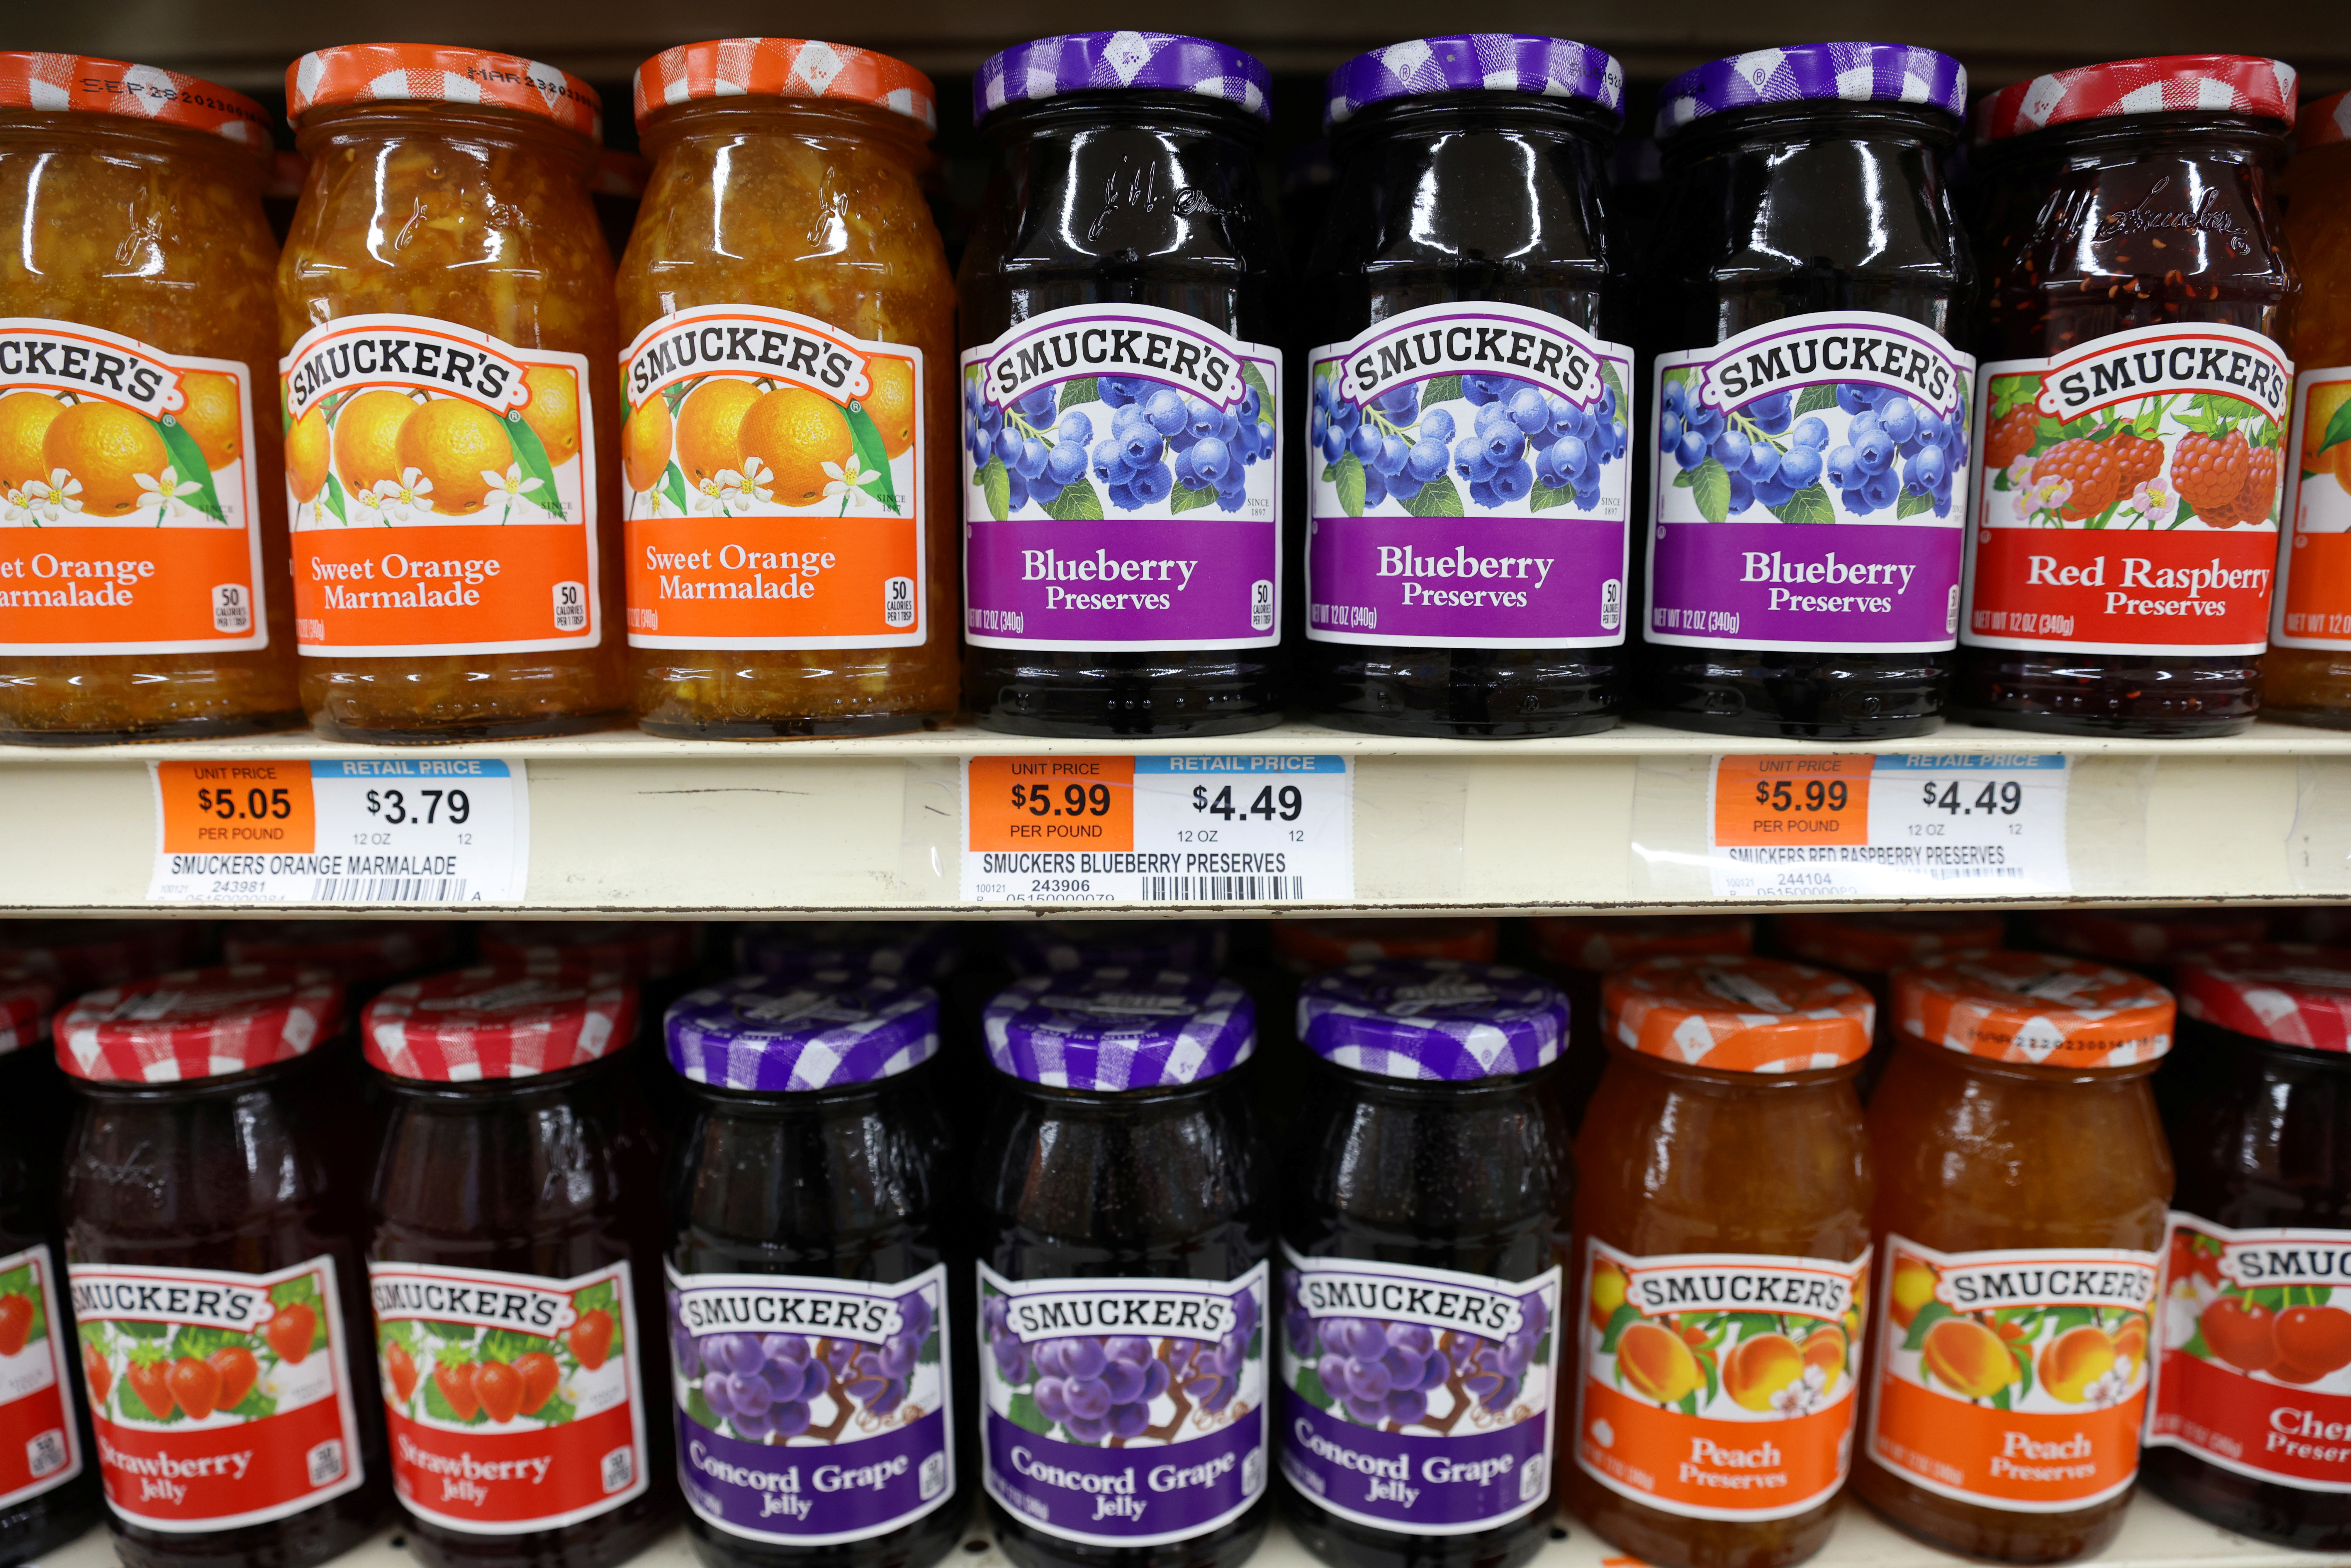 A range of Smucker's marmalade, preserves and jelly, a brand owned by The J.M. Smucker Company, is seen for sale in a store in Manhattan, New York City